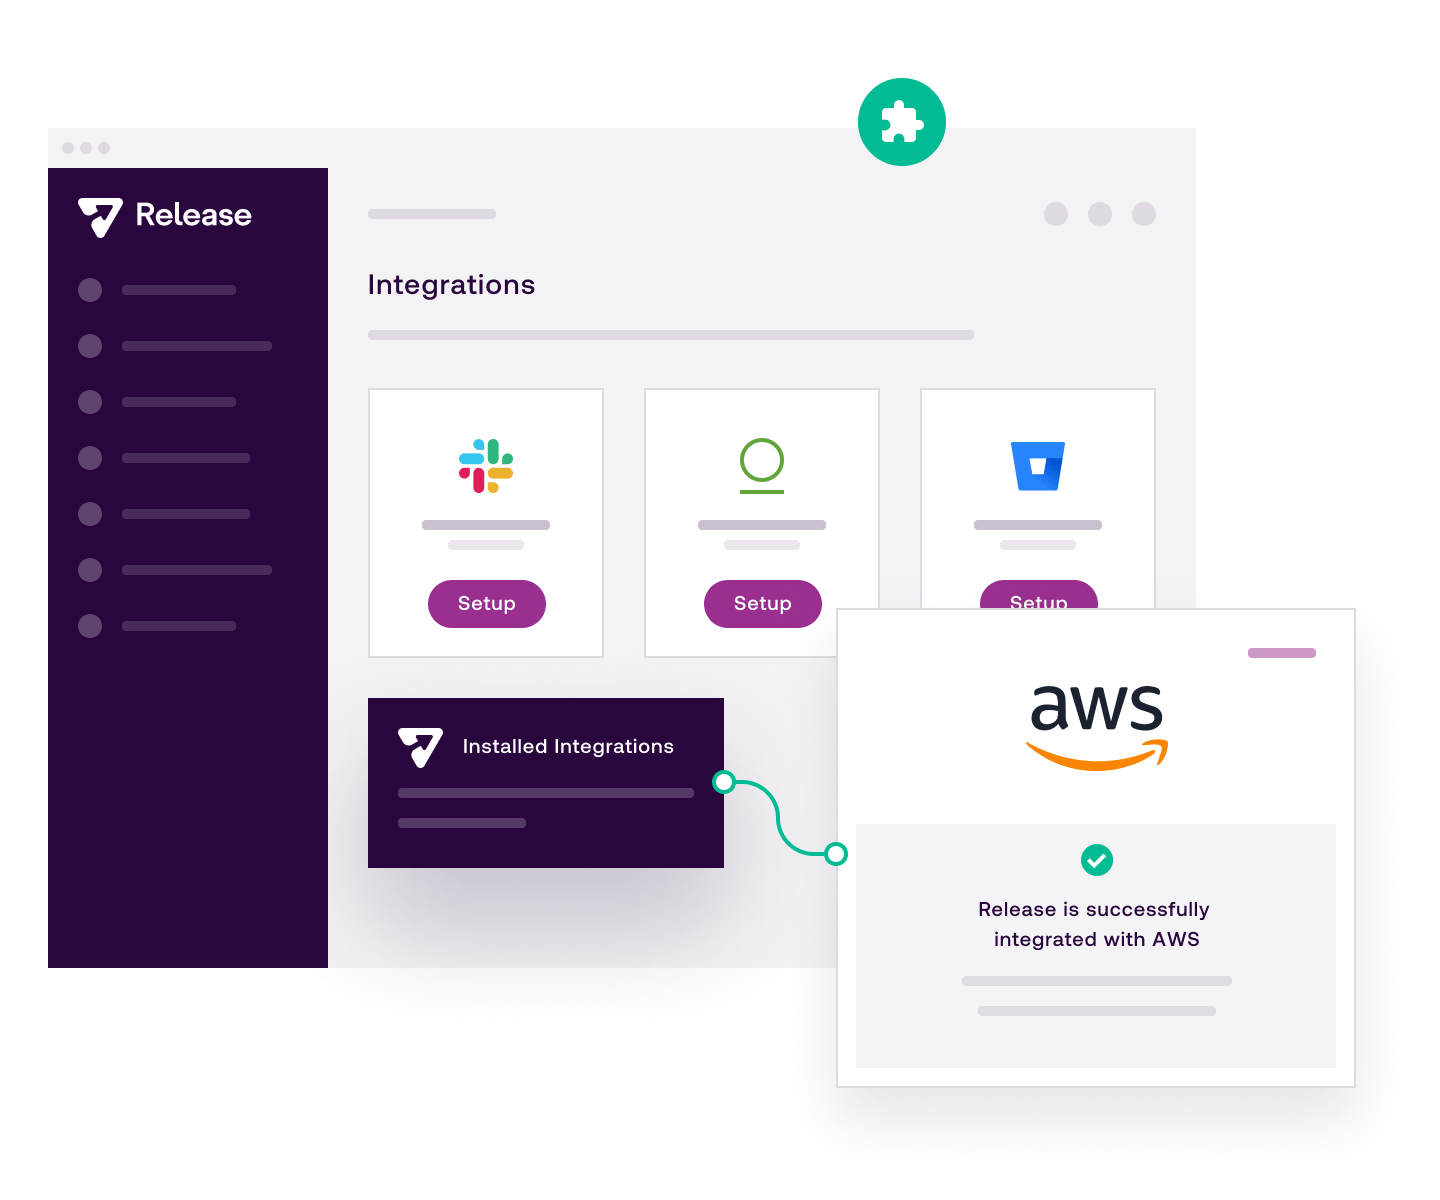 Release Environments run in an EKS cluster, within your AWS account, or can be hosted by us for a completely hands-off experience. On-premise or hosted, our service gives you total control over environment management and your data.